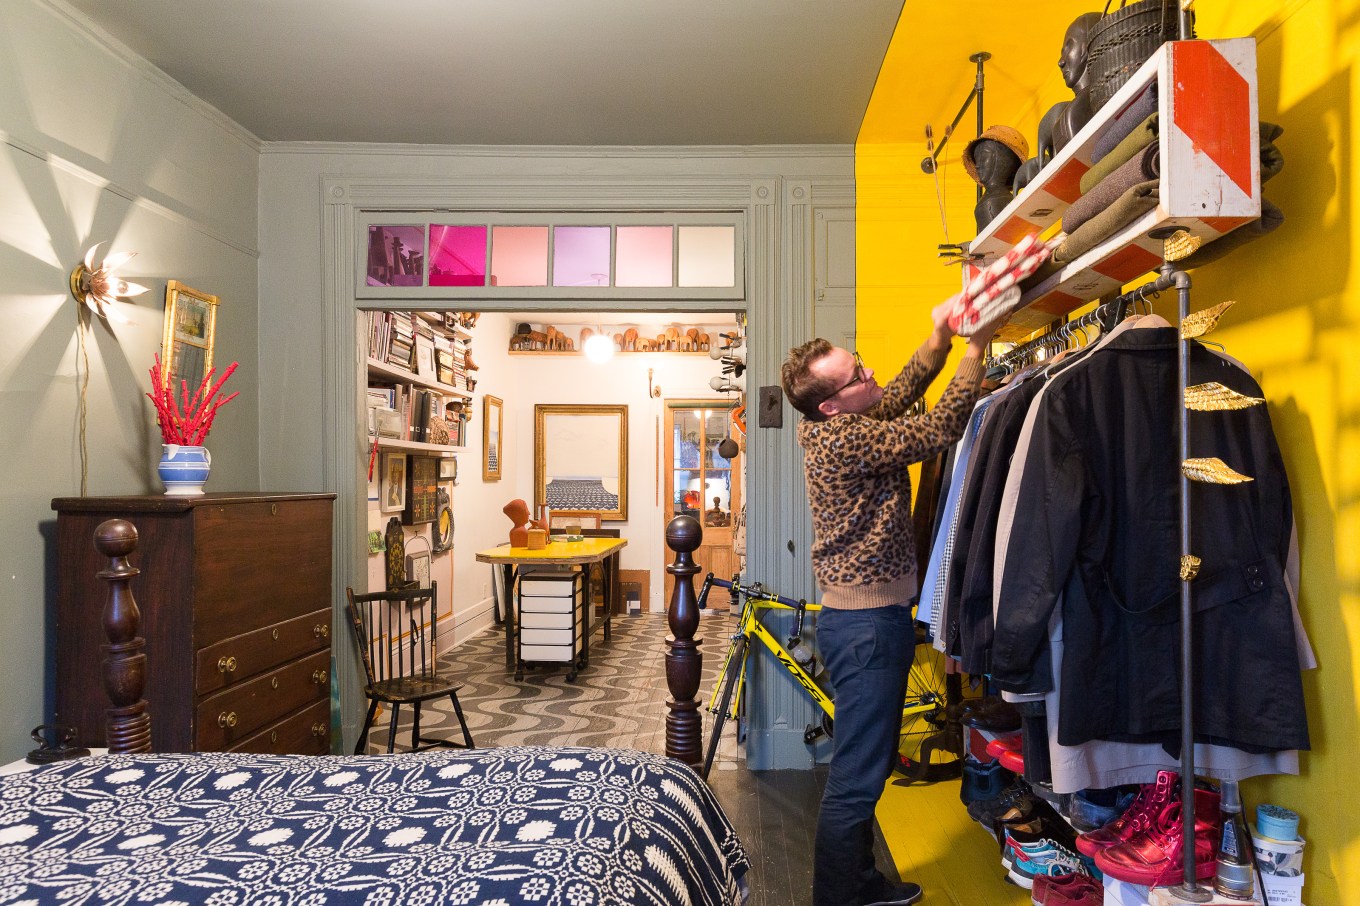 23 Space-saving Ideas To Dry Clothes In A Small Apartment - Tiny Partments